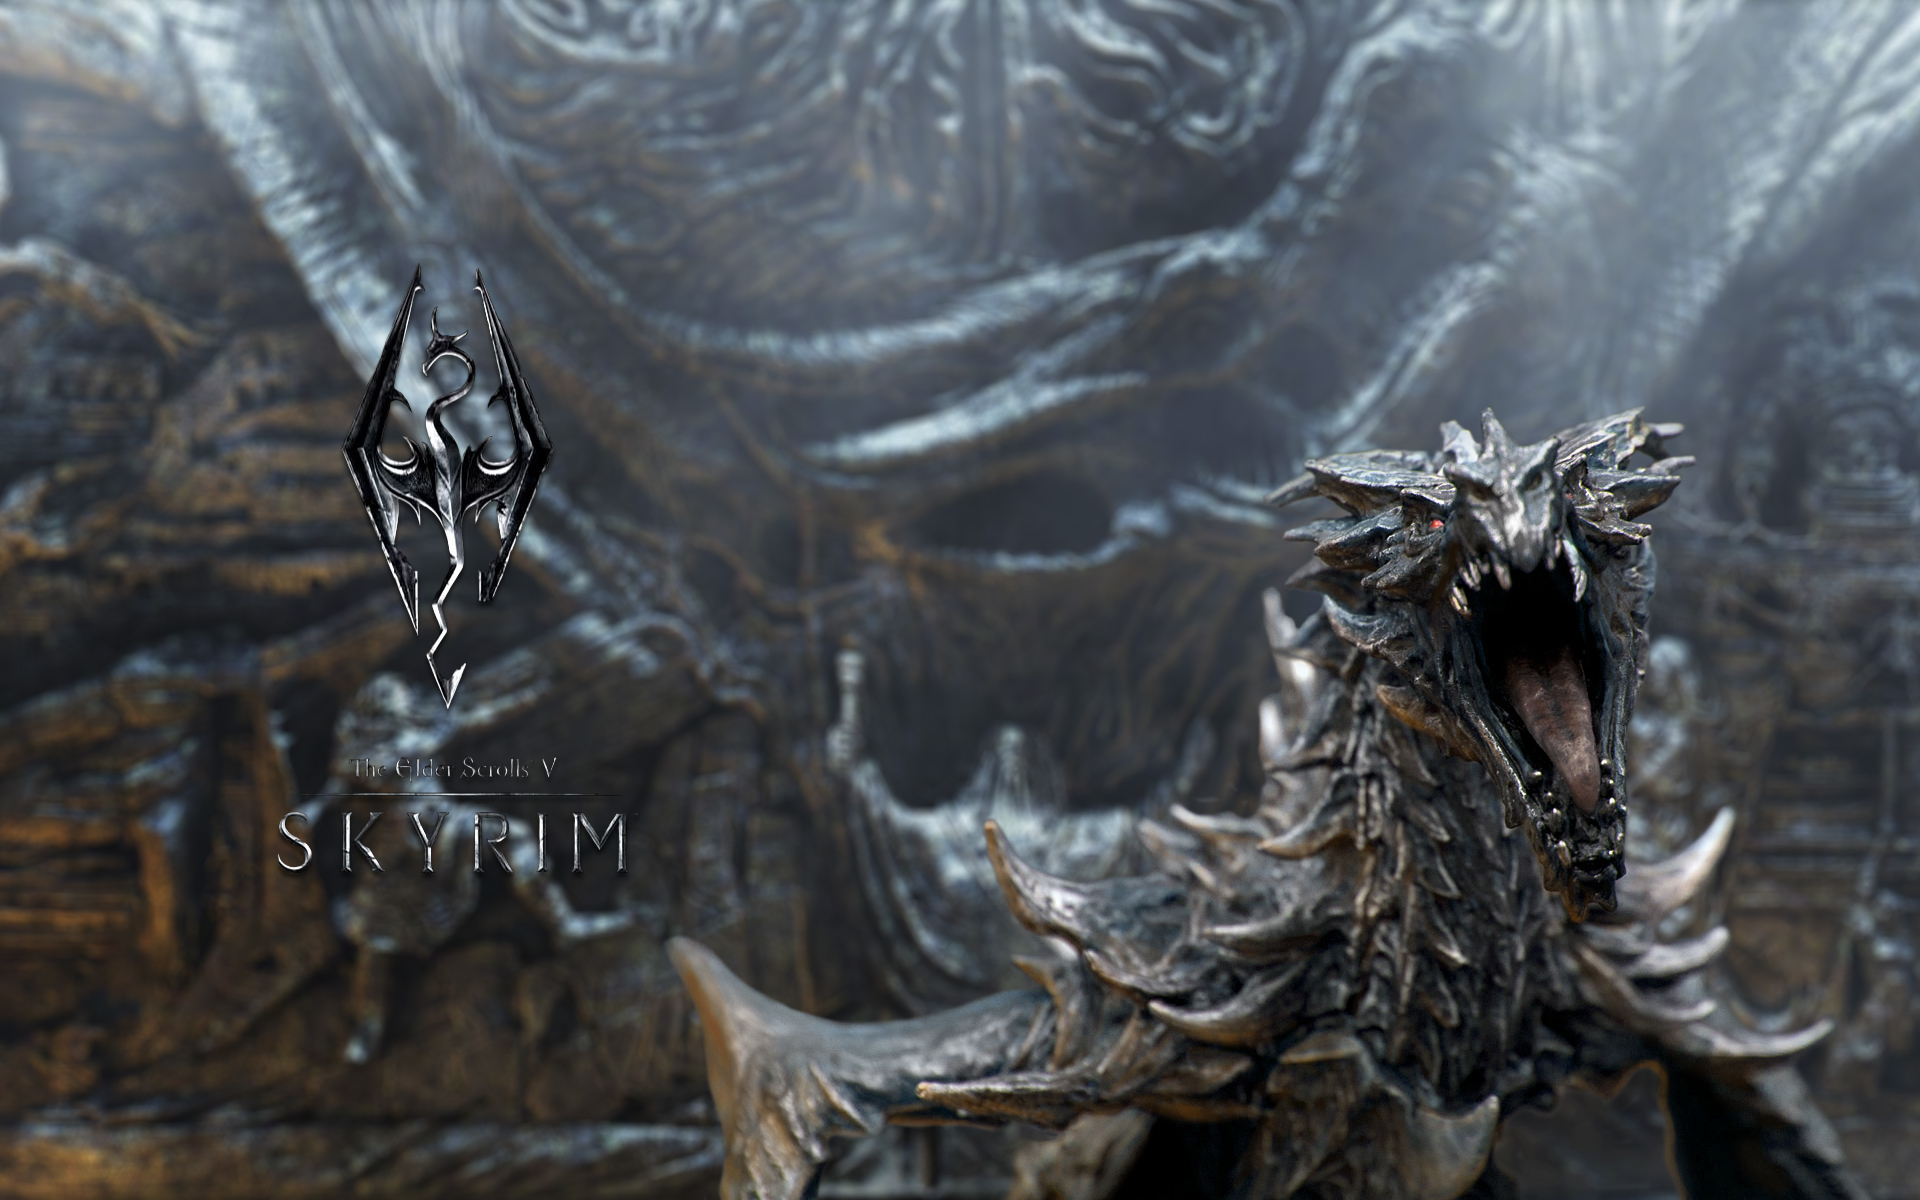 Skyrim-themed desktop wallpaper with captivating video game elements.